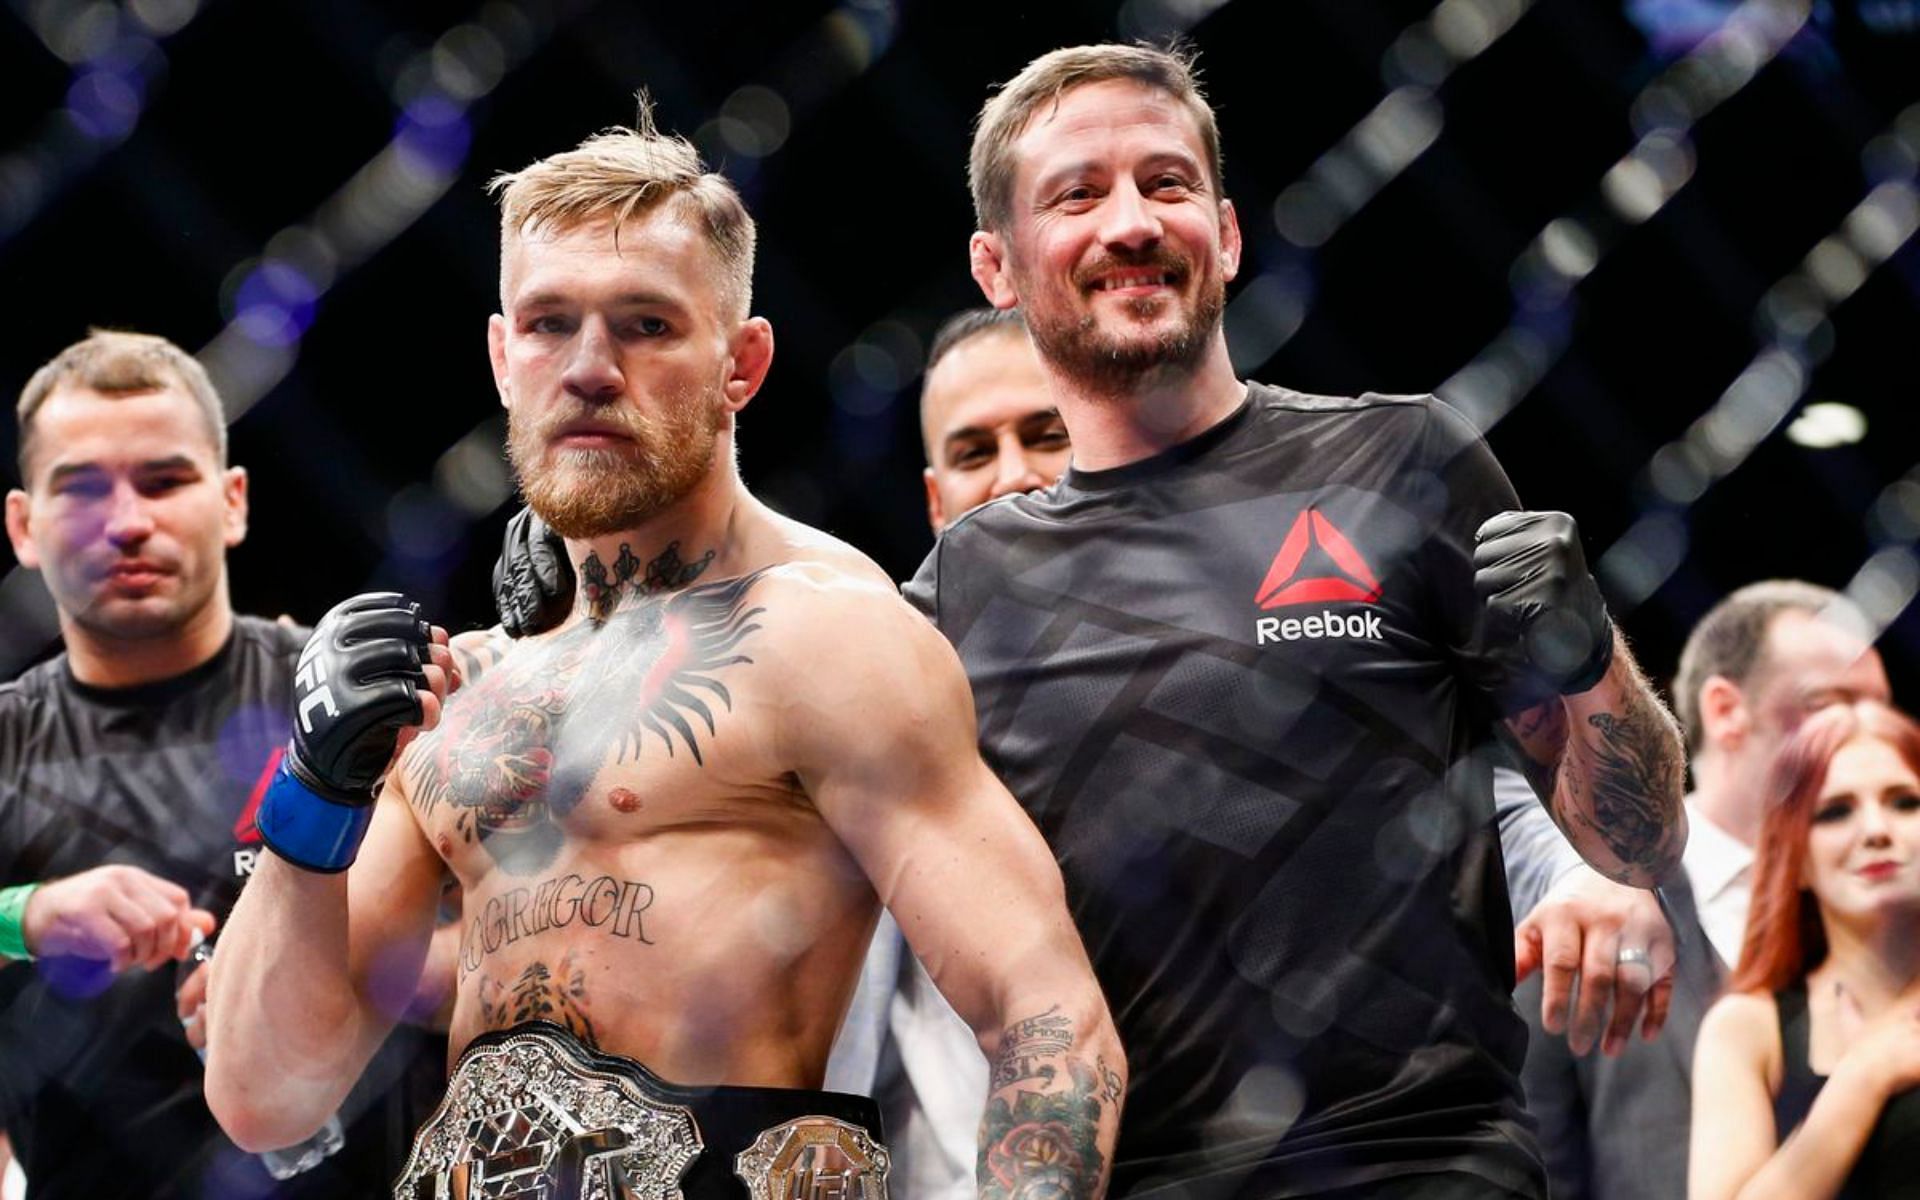 Conor McGregor and John Kavanagh. [via Getty Images]